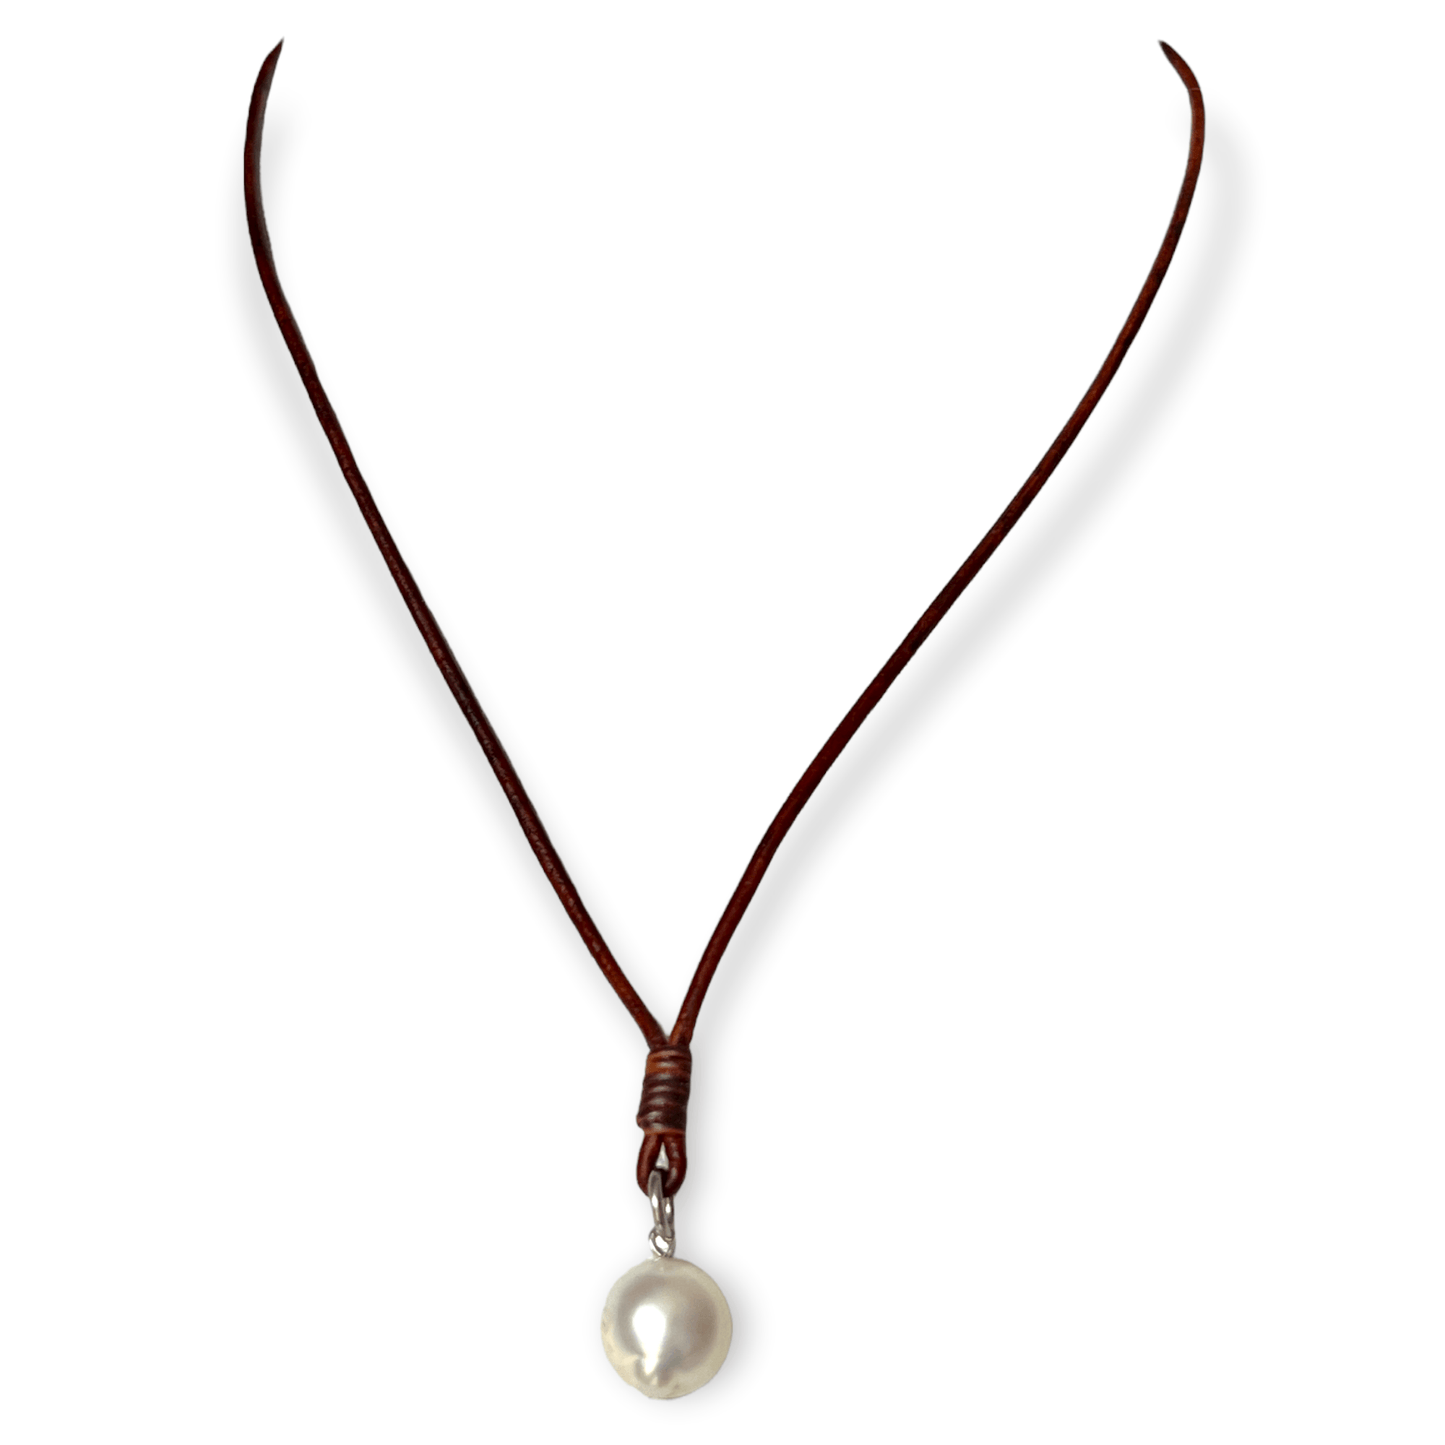 Simple double pearl necklace with a leather strap - Sundara Joon